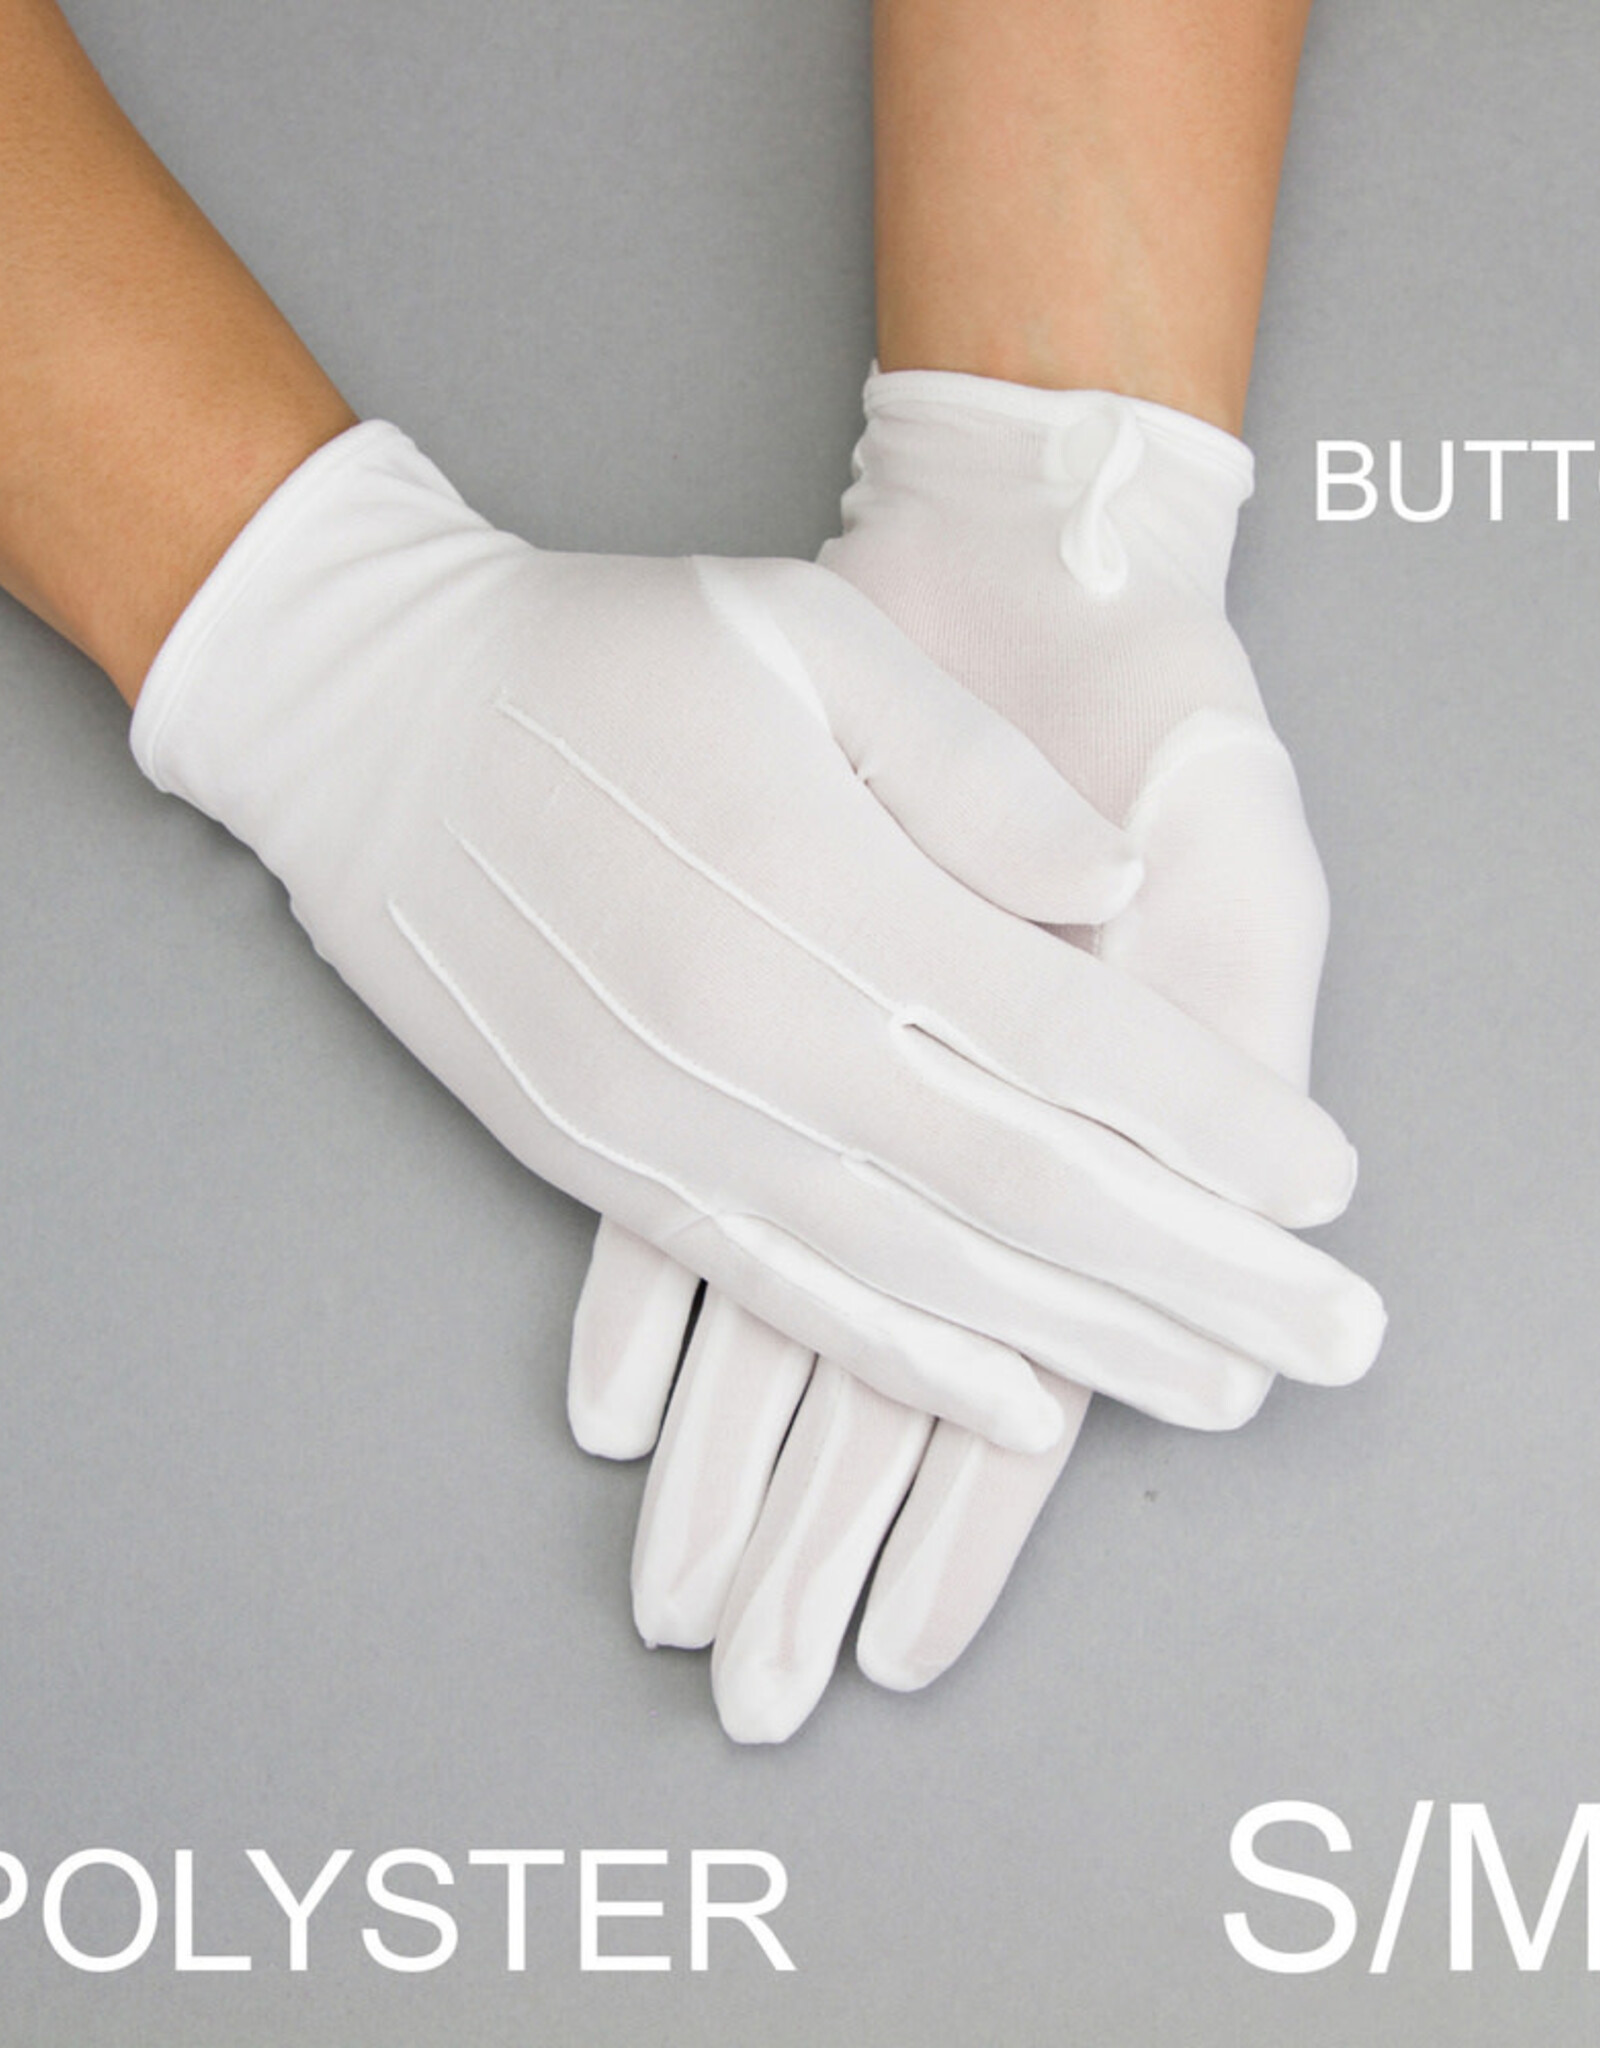 GLOVES-CLASSIC WRIST LENGTH WHITE W/CREASES